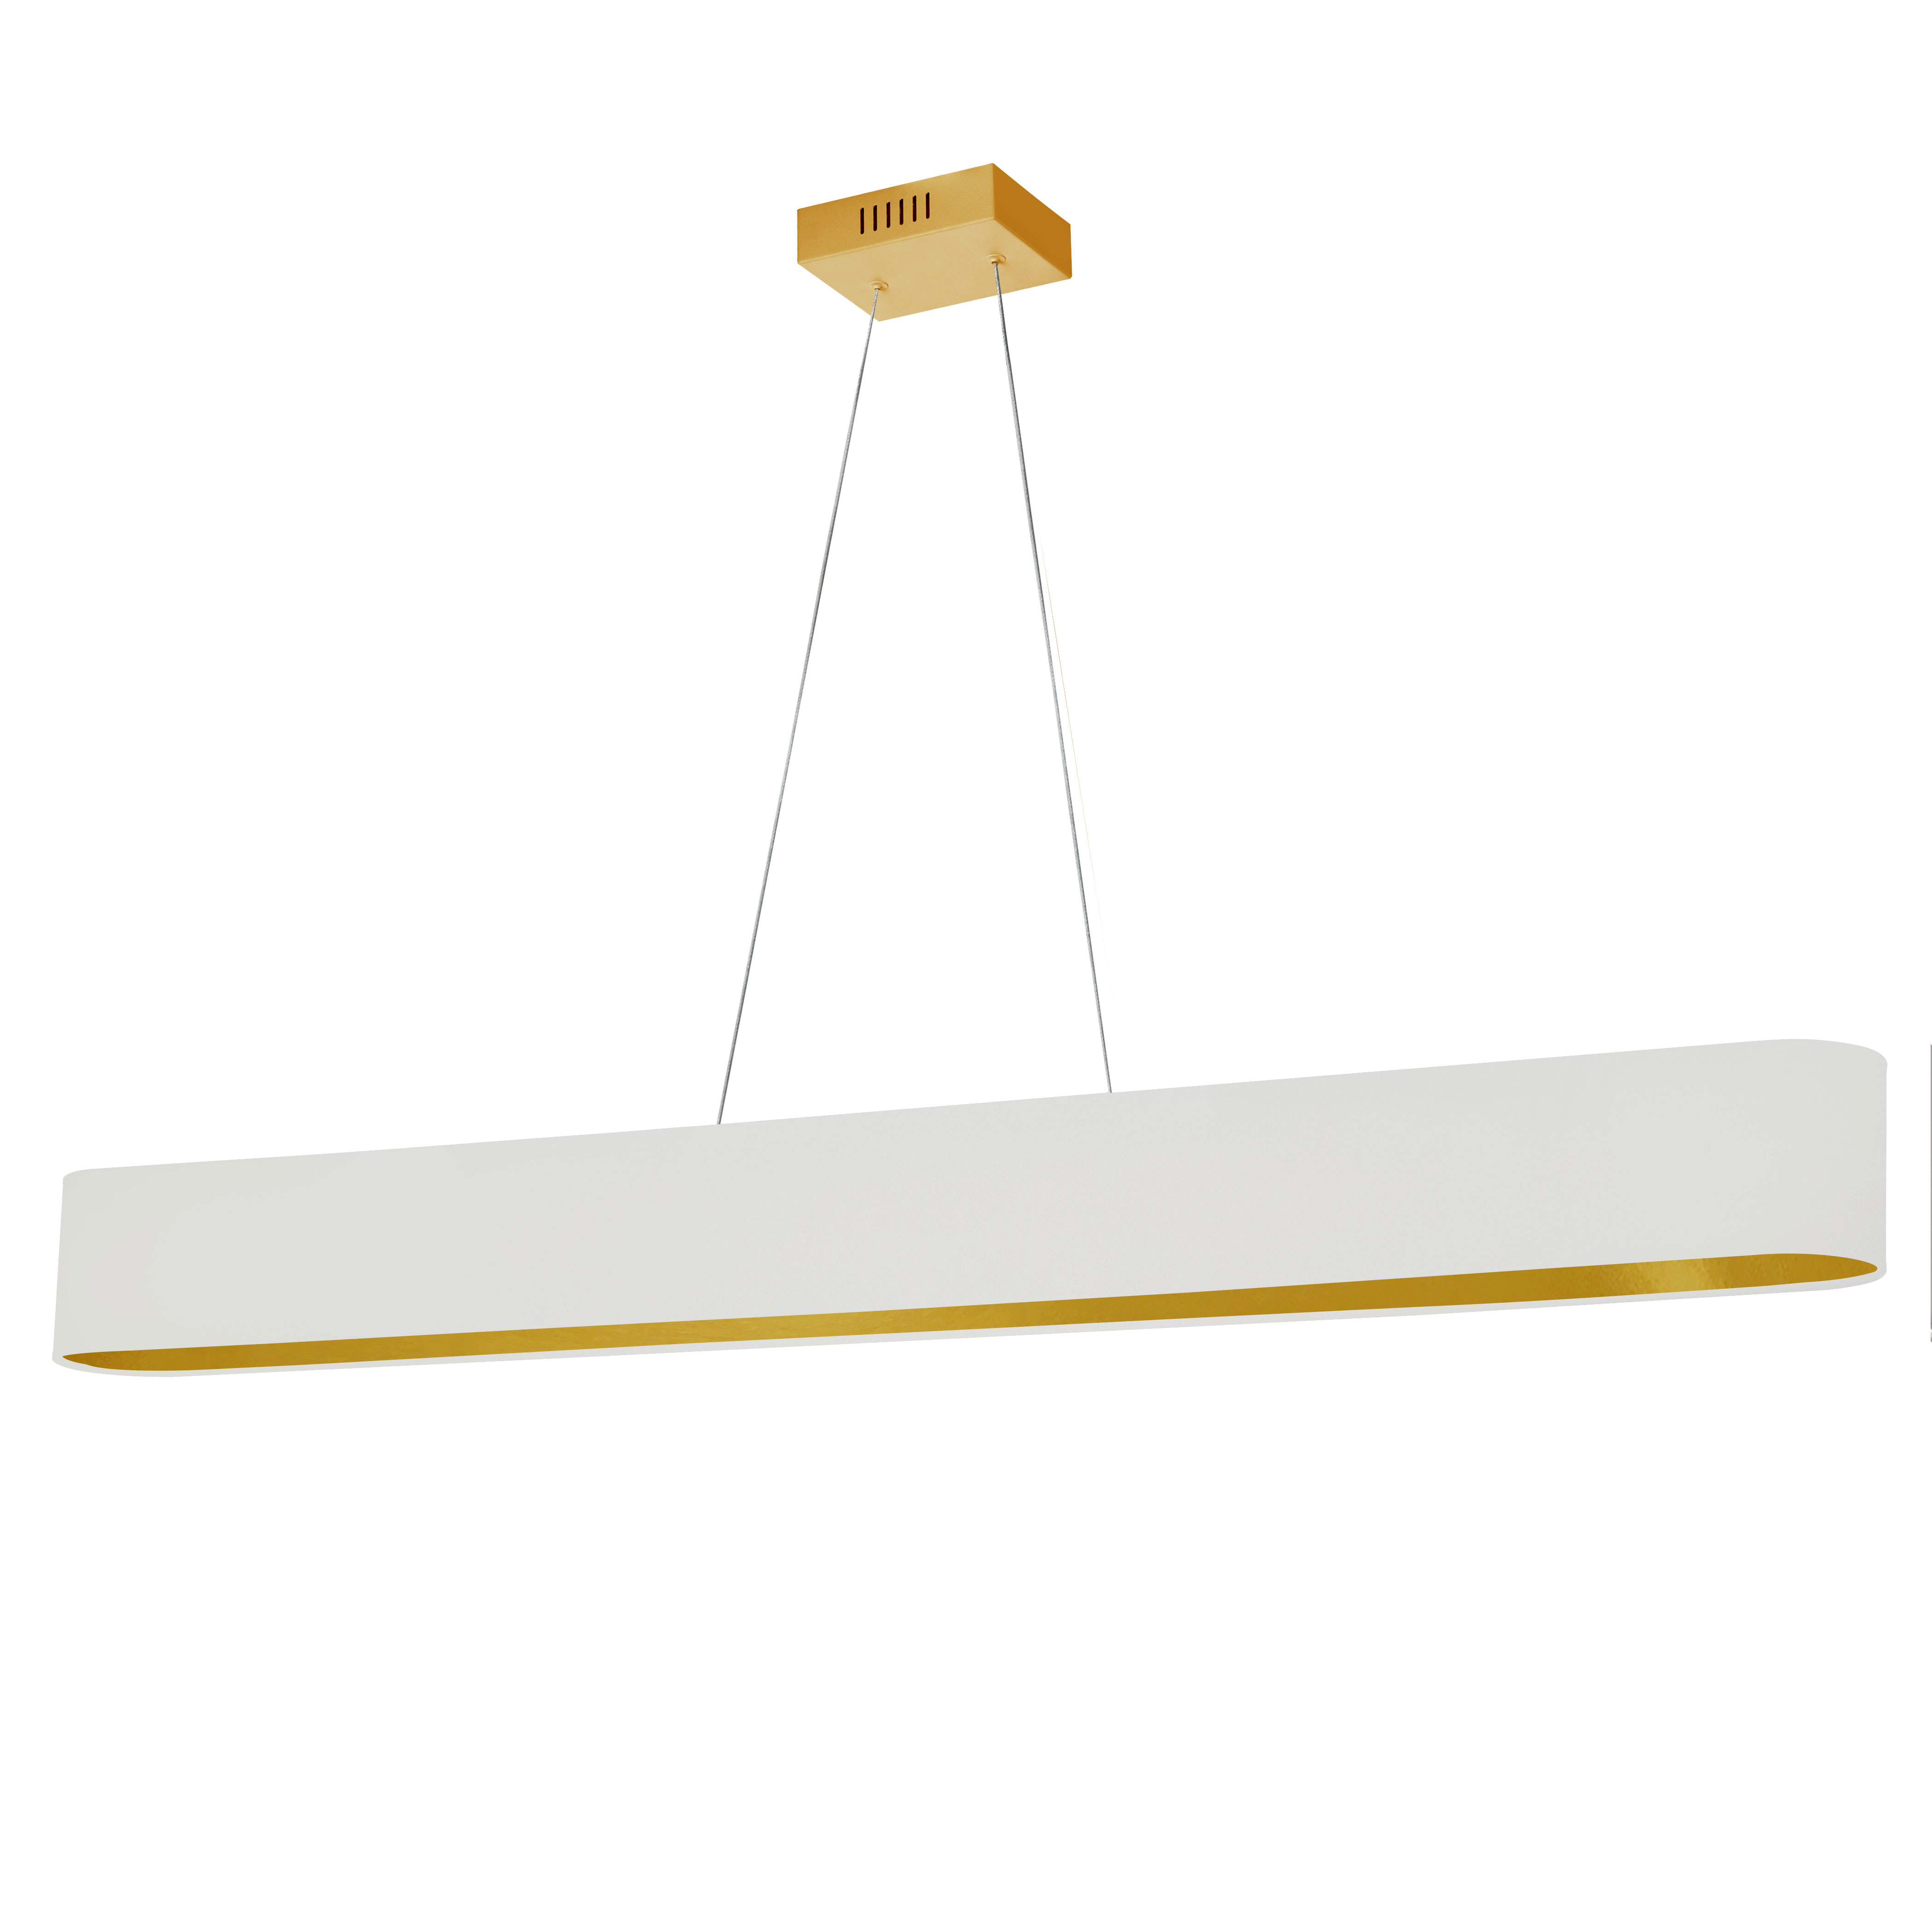 30W Horizontal Aged Brass Pendant with White/Gold Shade